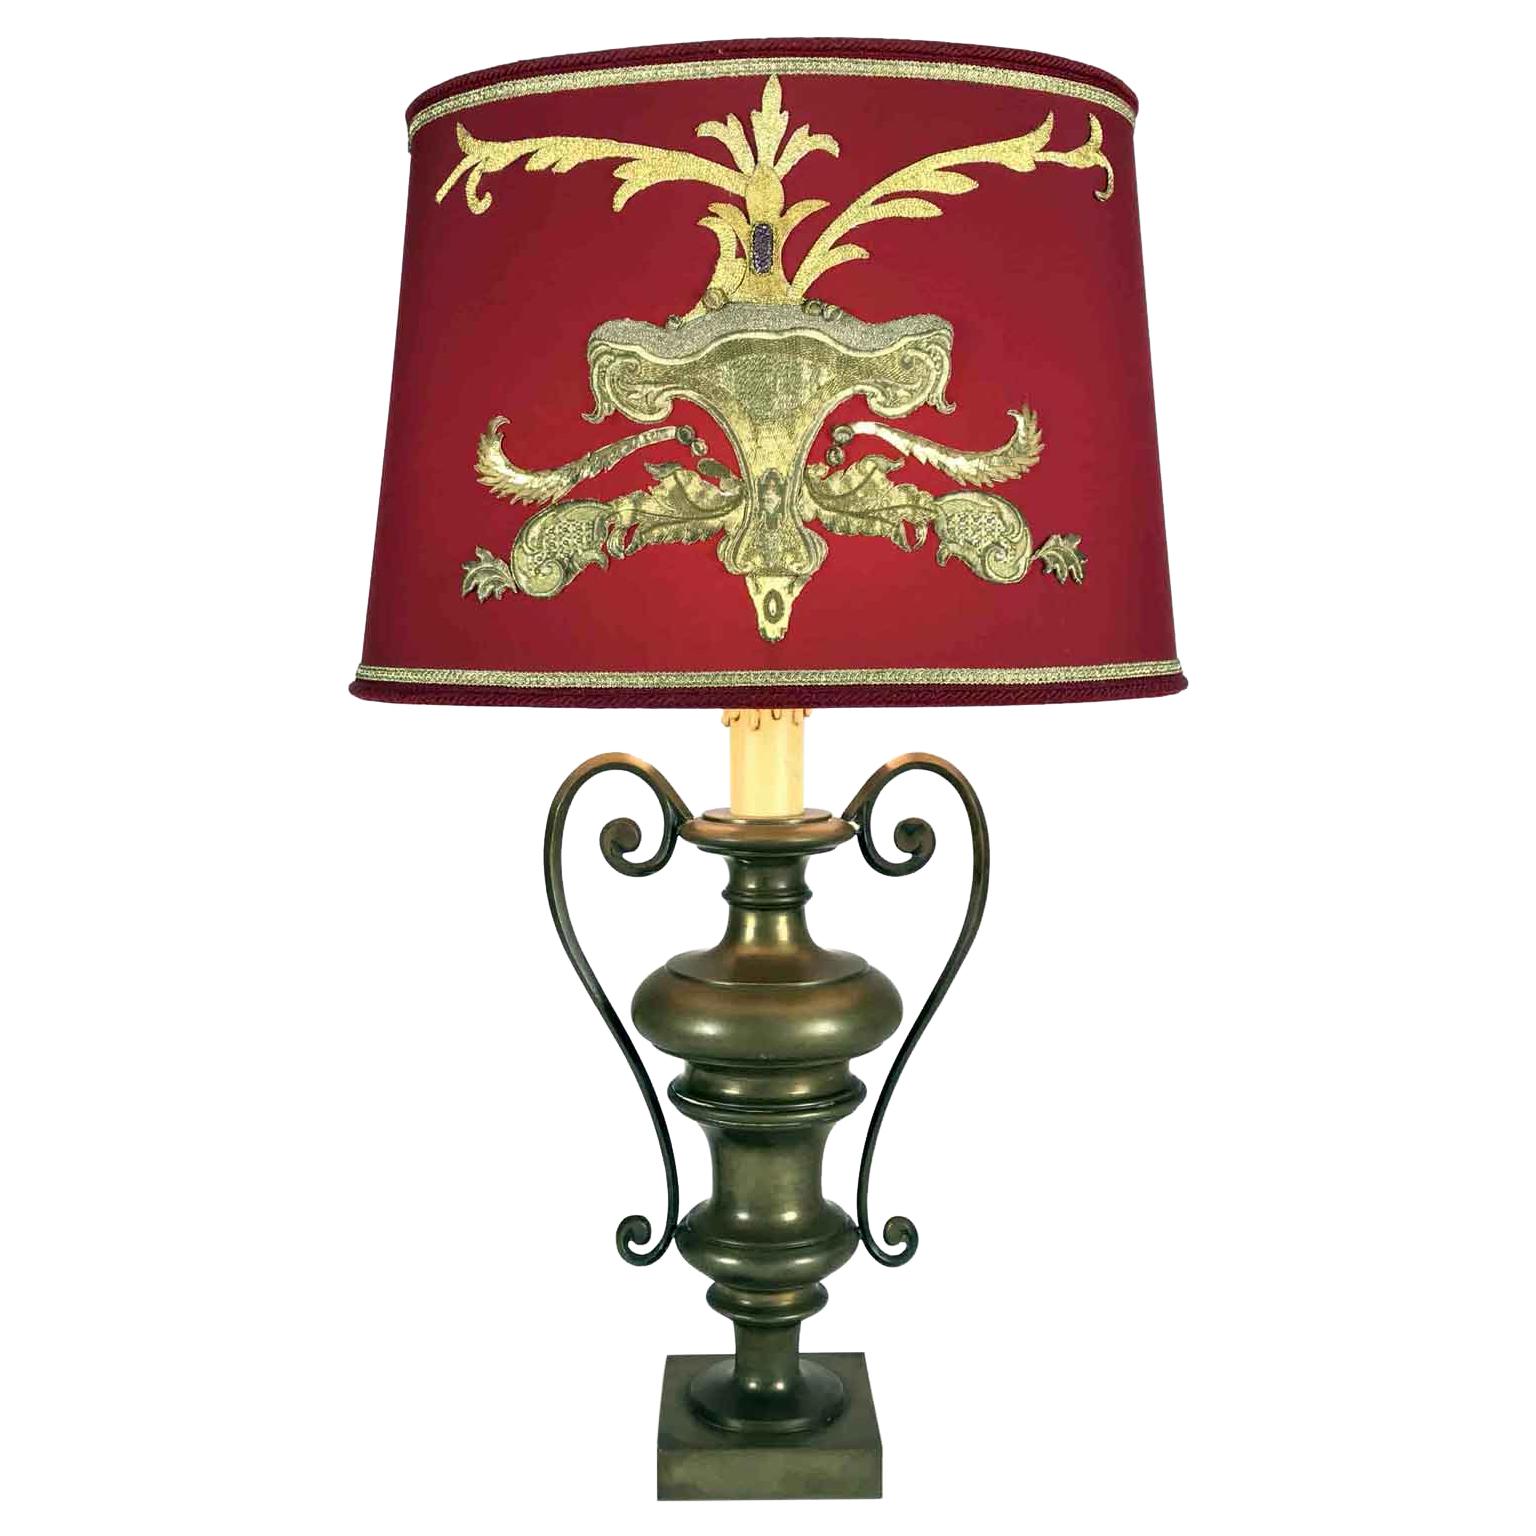 20th Century Italian Empire Bronze Table Lamp Red Lampshade Golden Embroideries For Sale